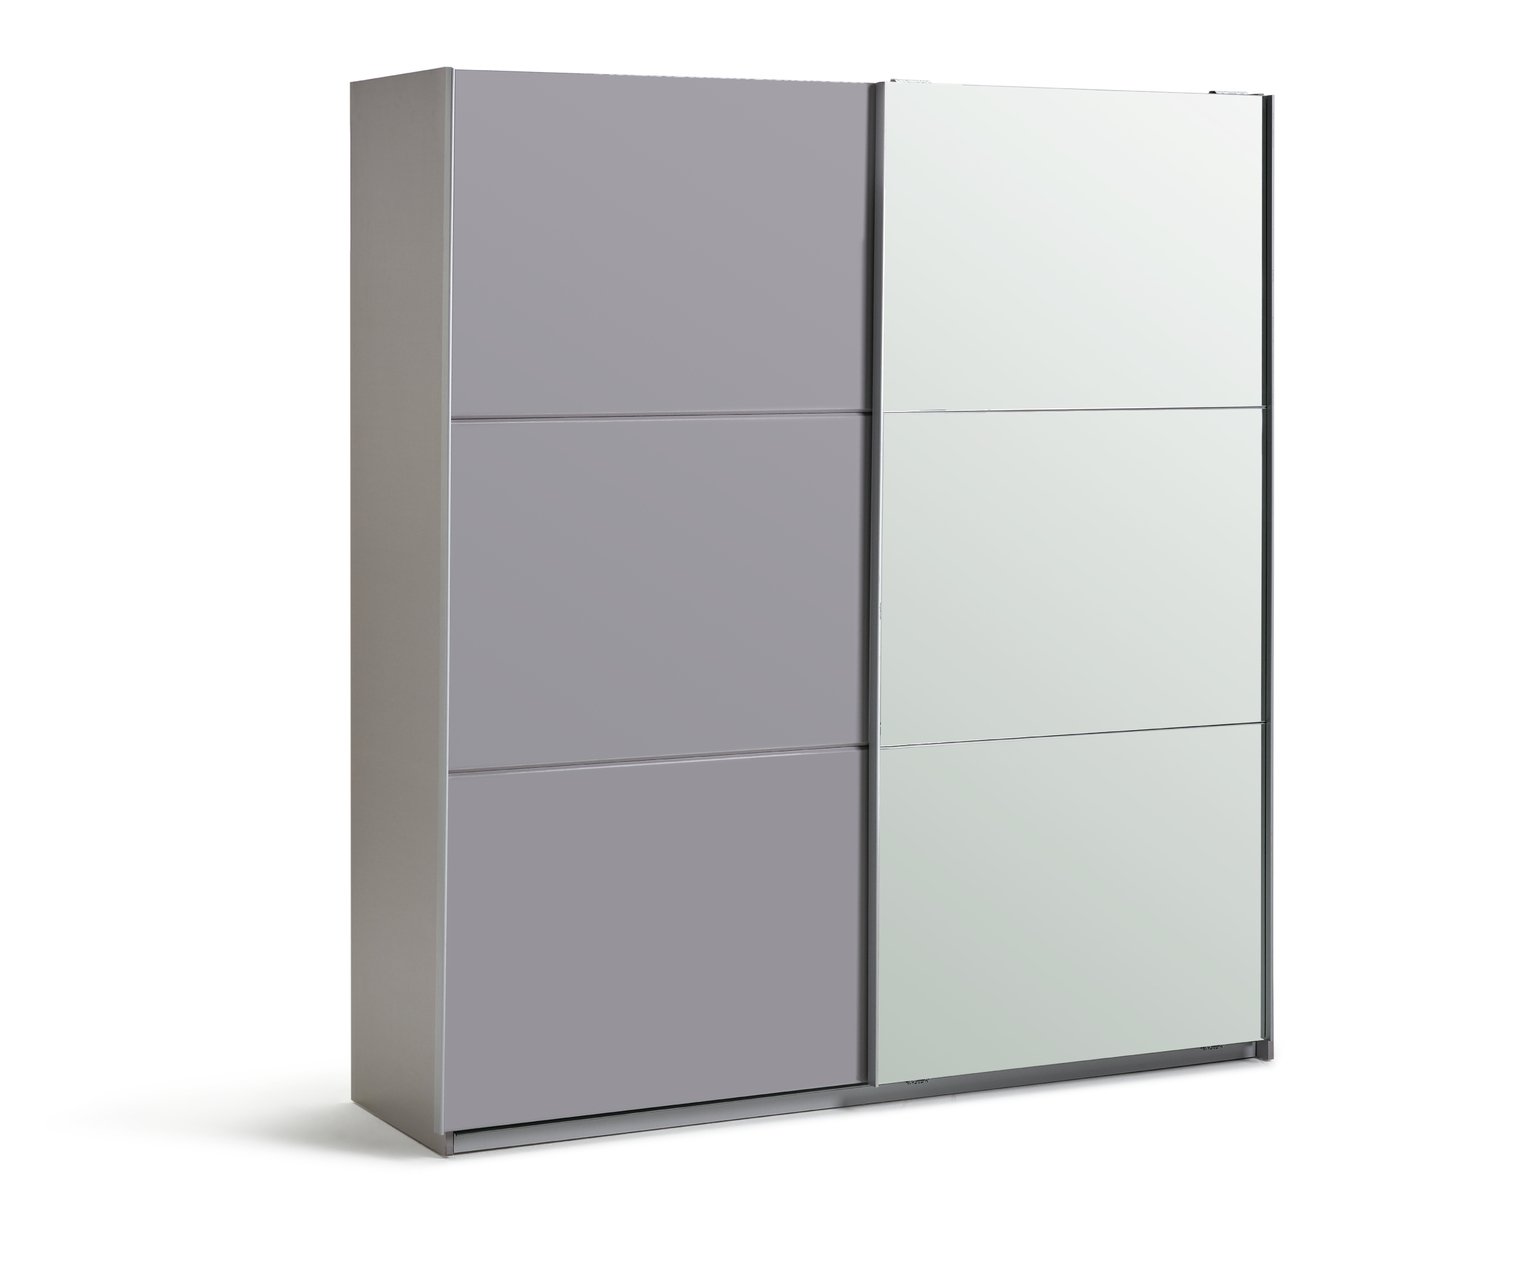 Argos Home Holsted Large Grey Gloss &Mirror Sliding Wardrobe Review